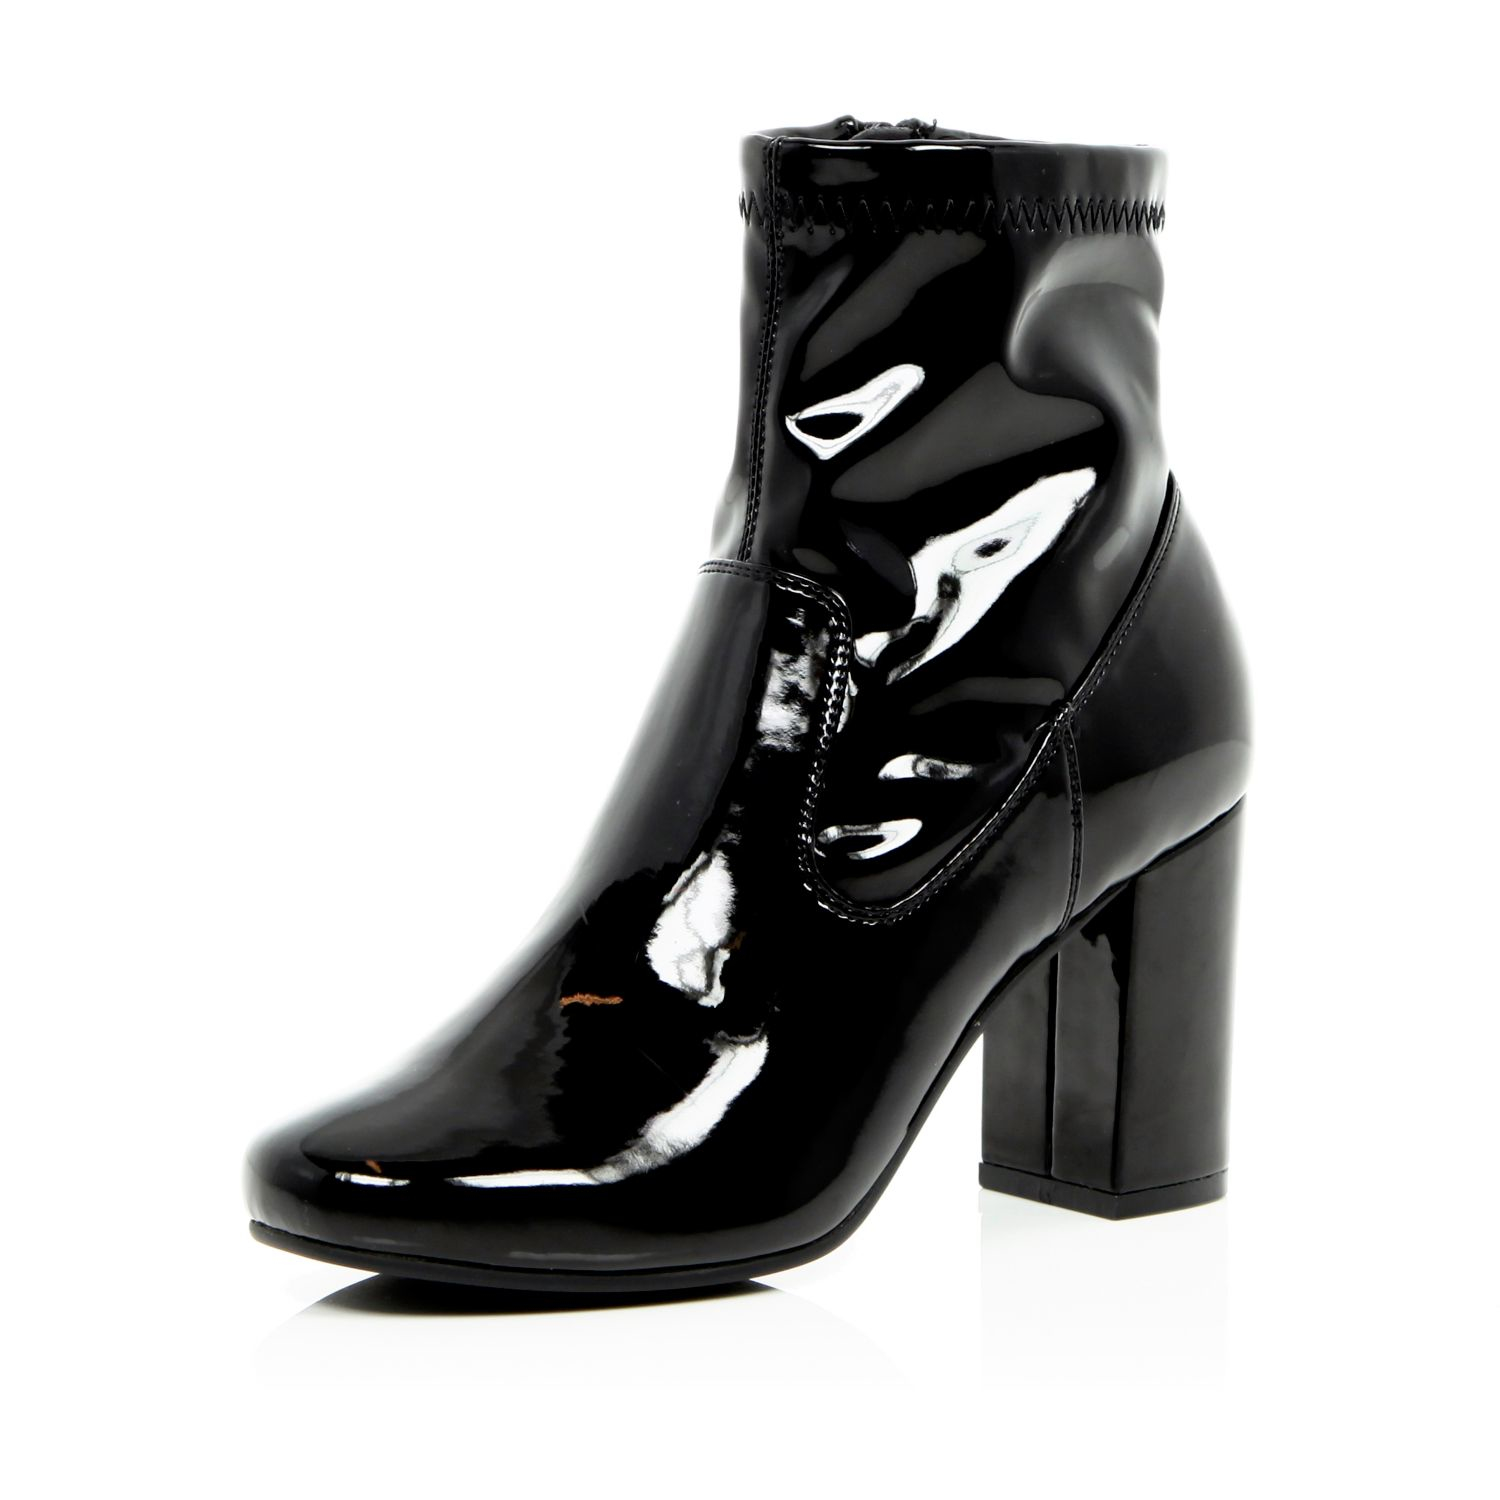 River island Black Patent Heeled Ankle Boots in Black | Lyst